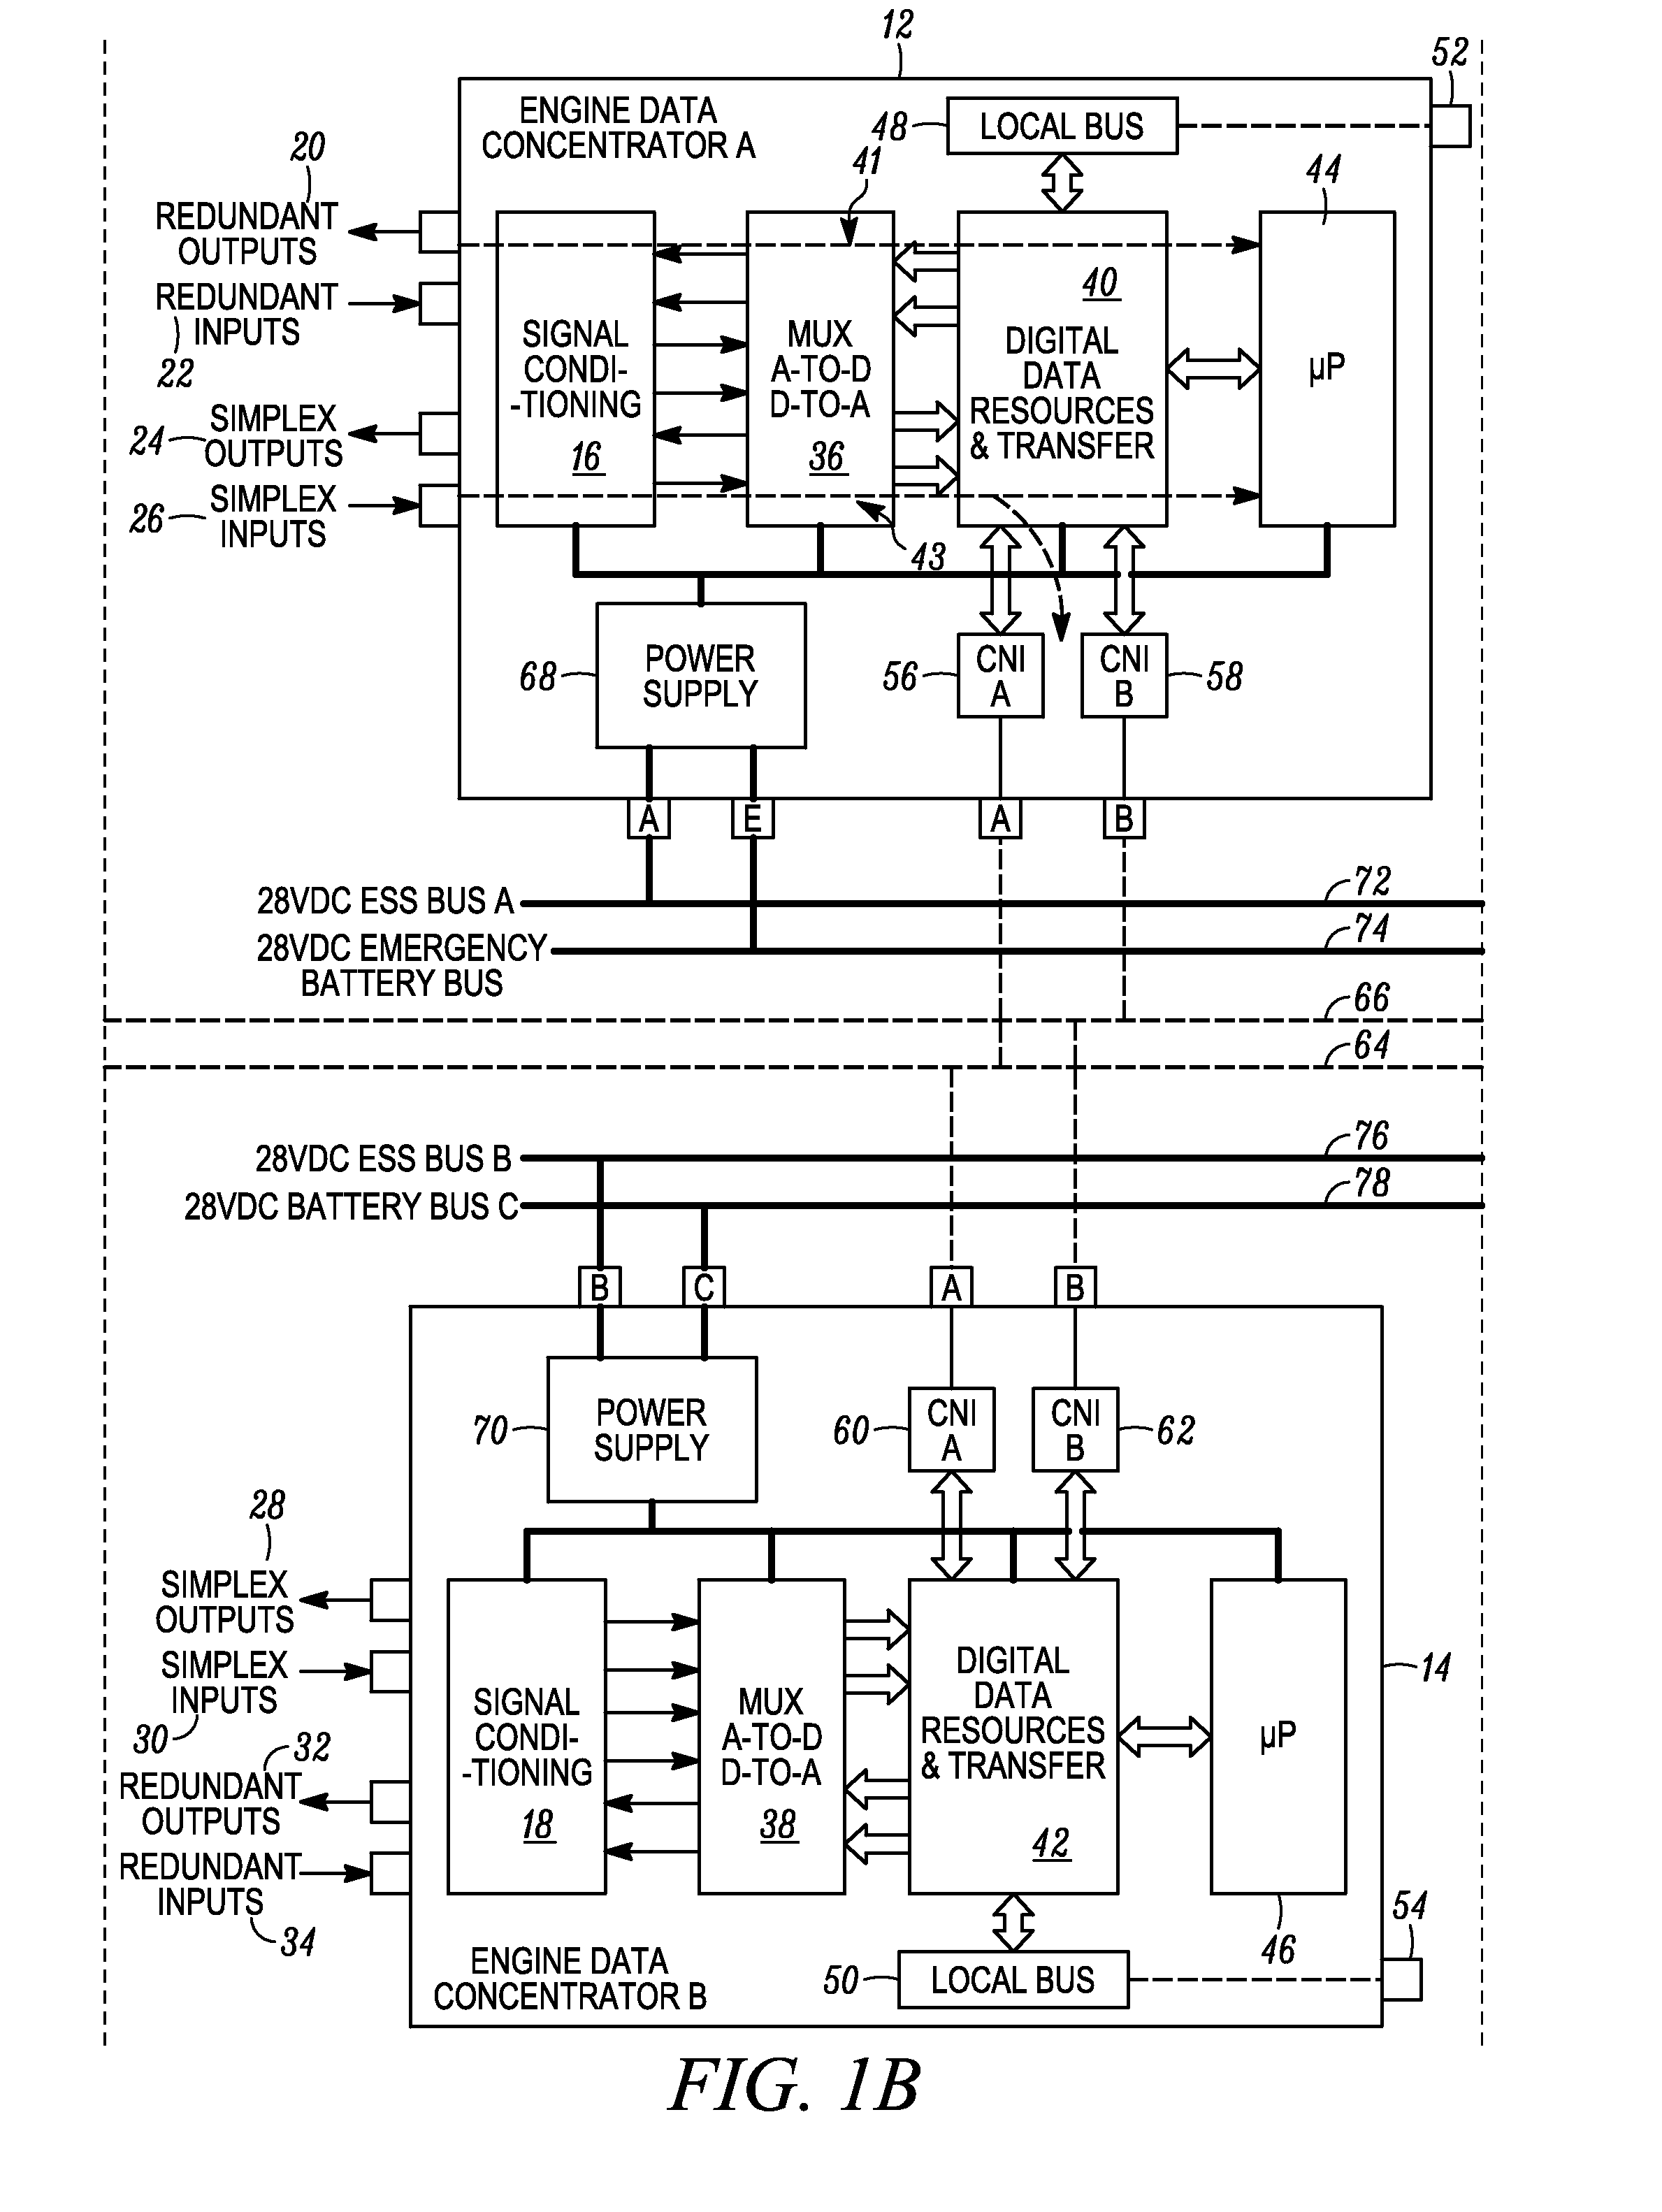 Distributed engine control system